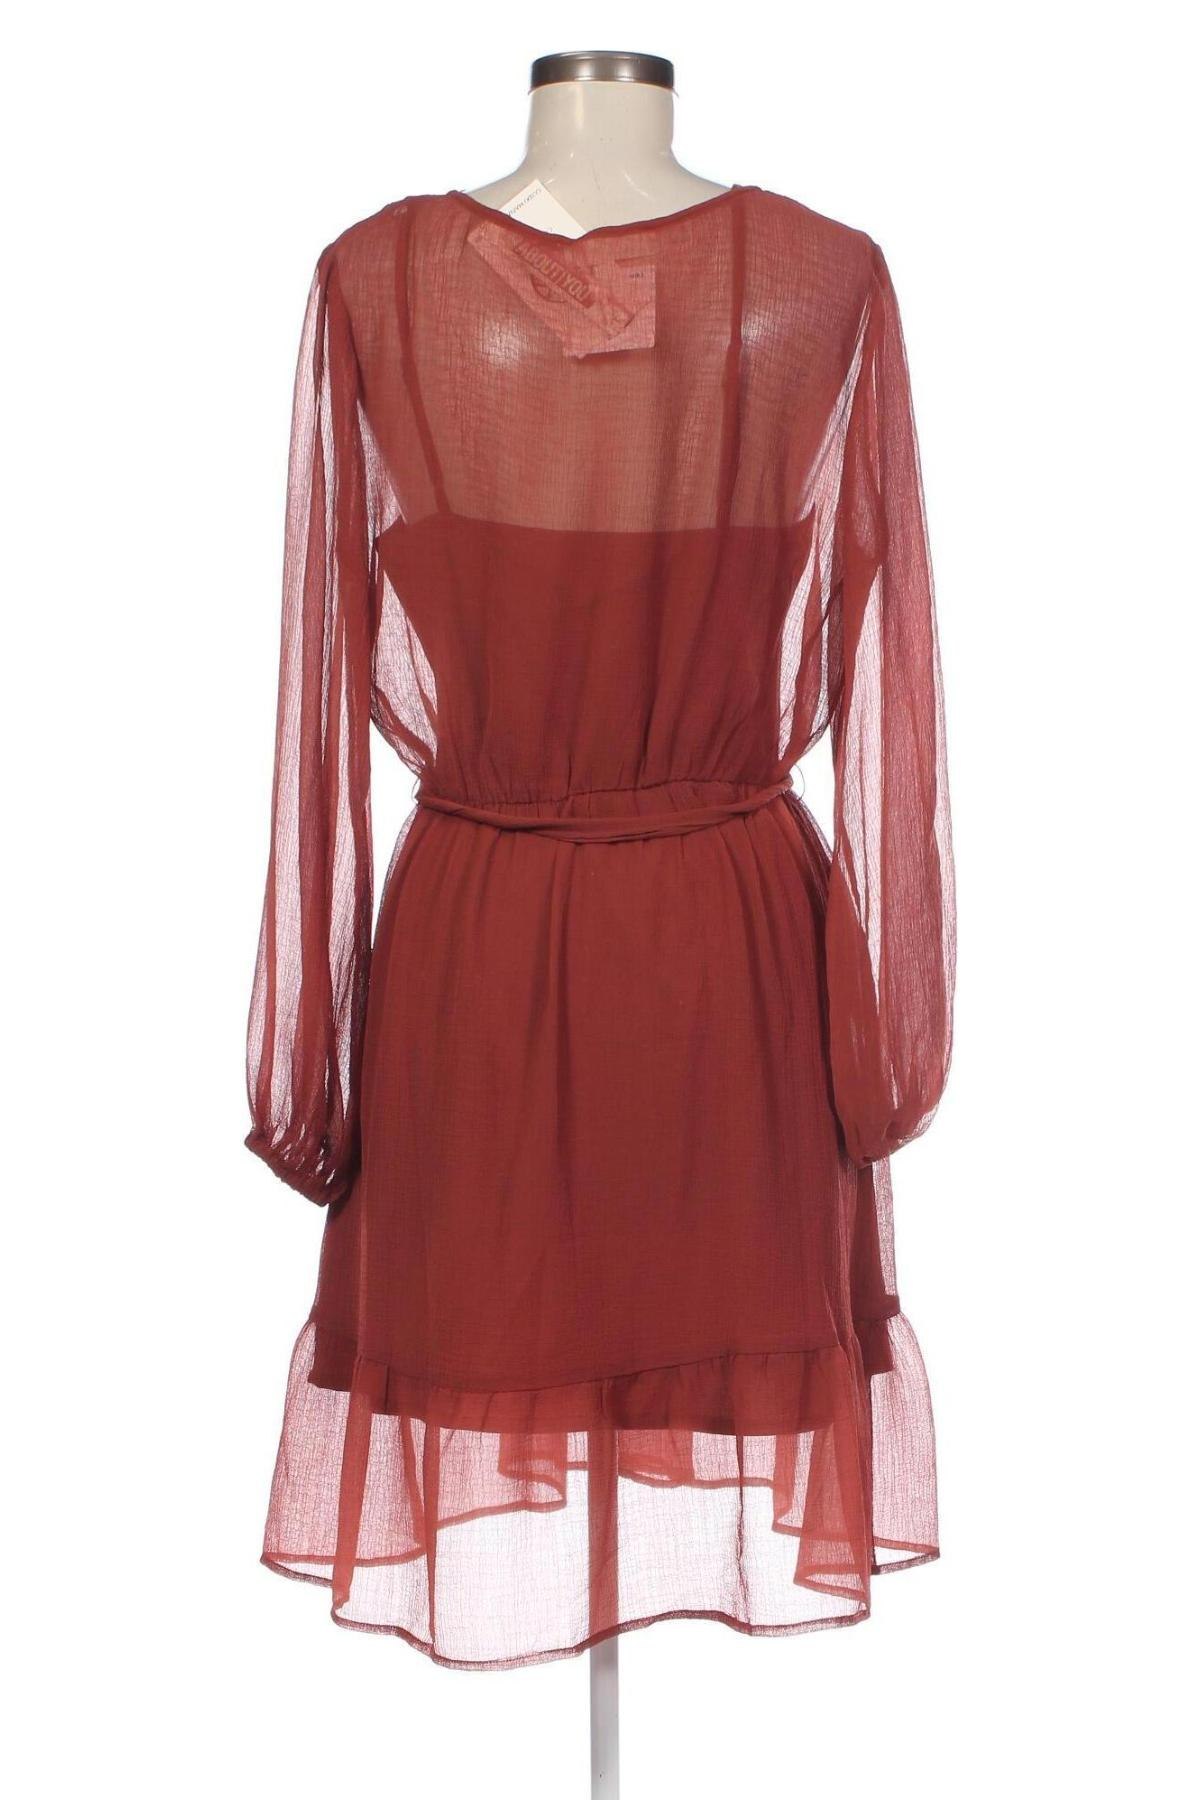 Kleid Guido Maria Kretschmer for About You, Größe M, Farbe Rot, Preis € 55,67